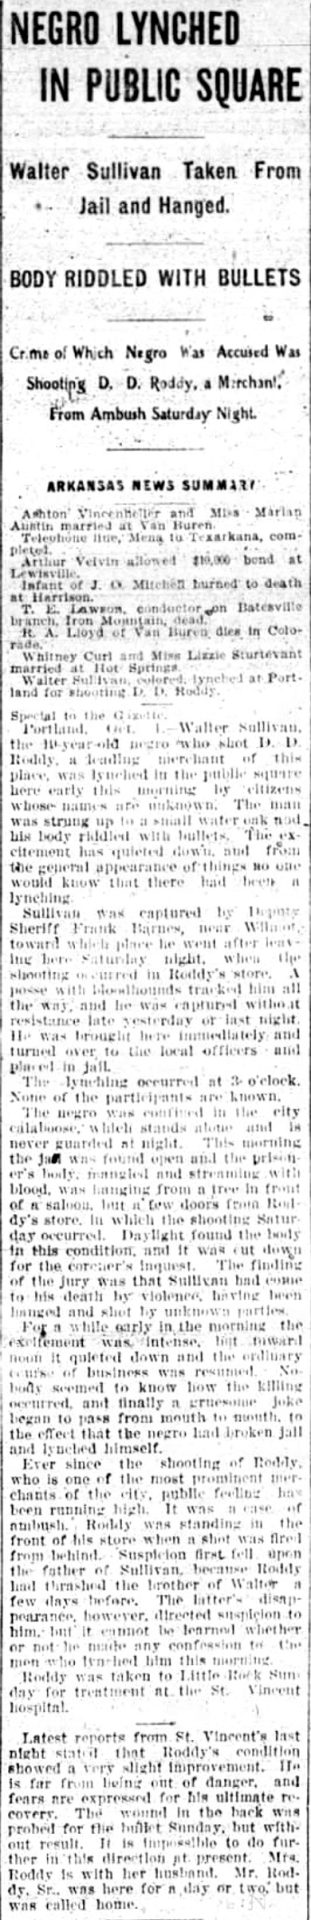 "Negro lynched in public square" newspaper clipping